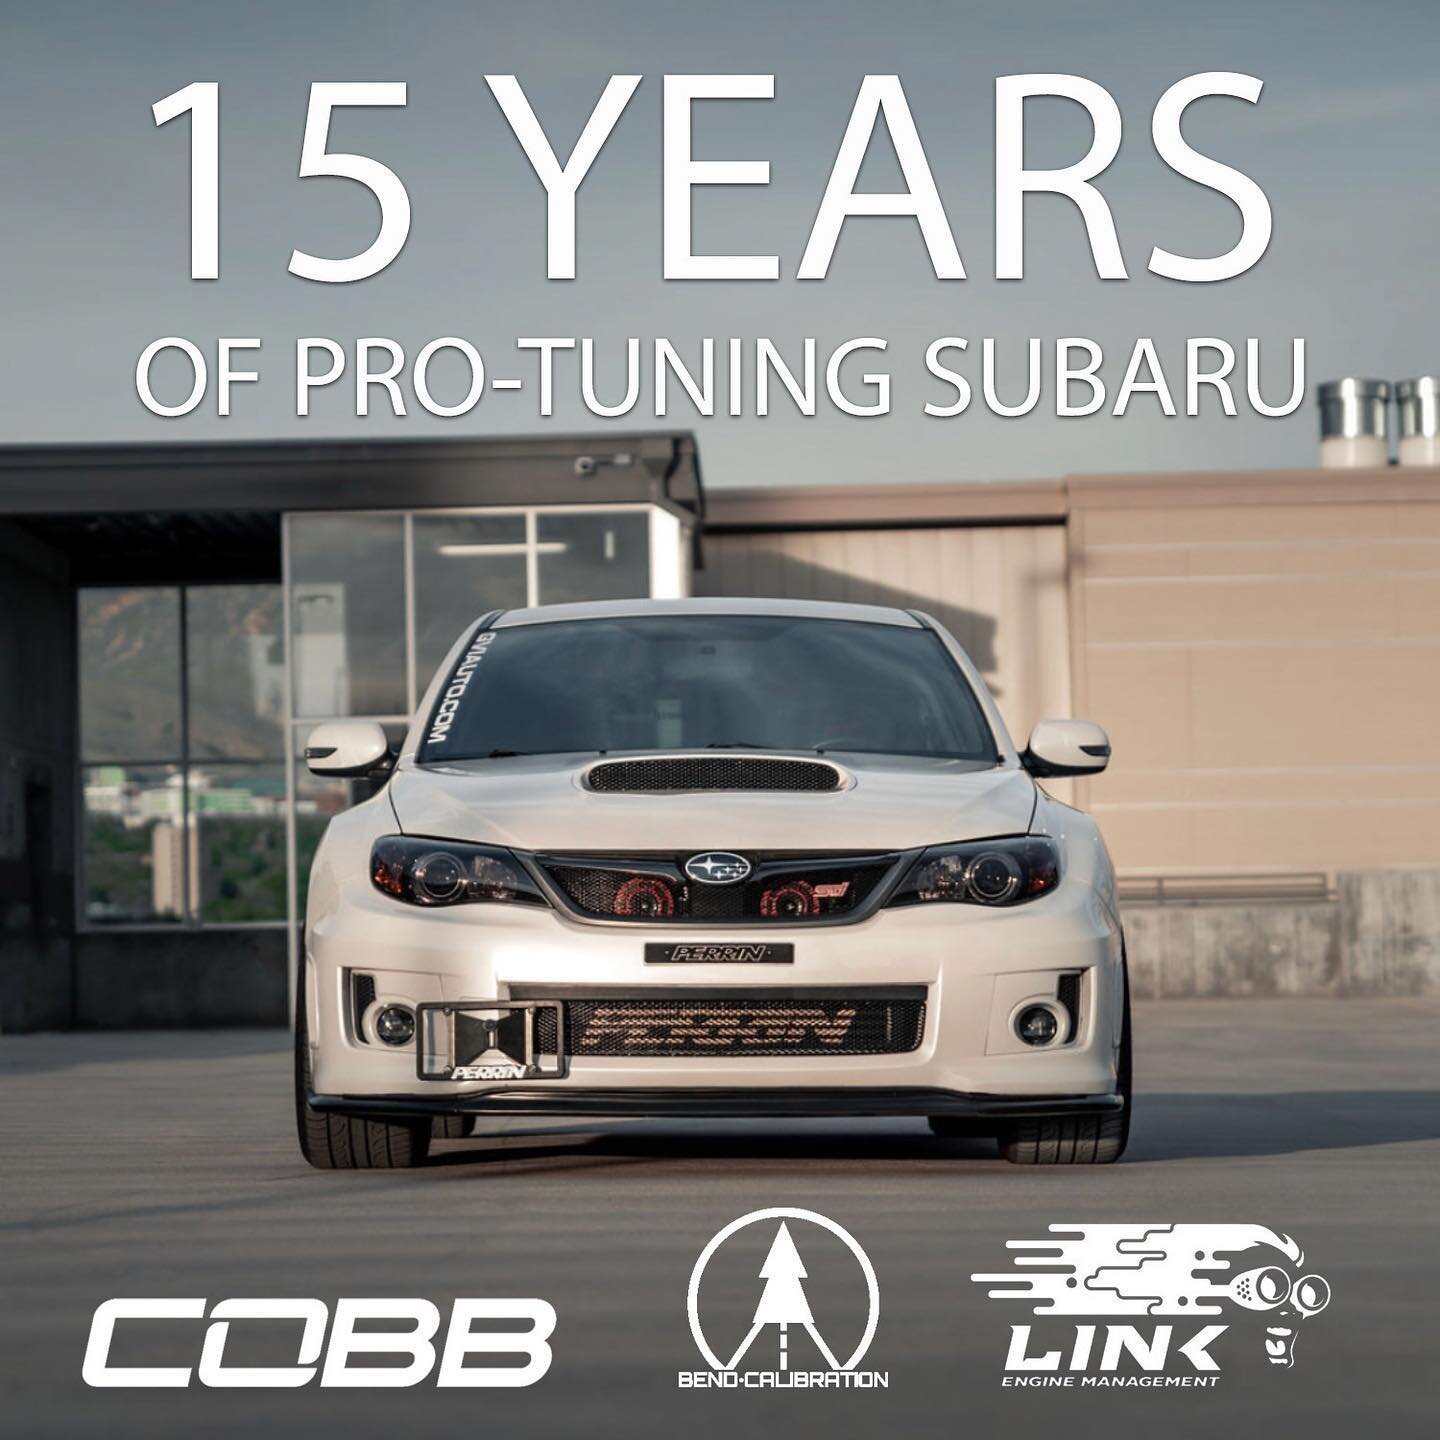 Time flies!&nbsp;&nbsp;So can your Subaru if we&rsquo;re tuning it!&nbsp;&nbsp;We have partnered with shops throughout the country that can handle the mechanical side of things.&nbsp;&nbsp;Kind of crazy to imagine we&rsquo;ve been pro-tuning for as l